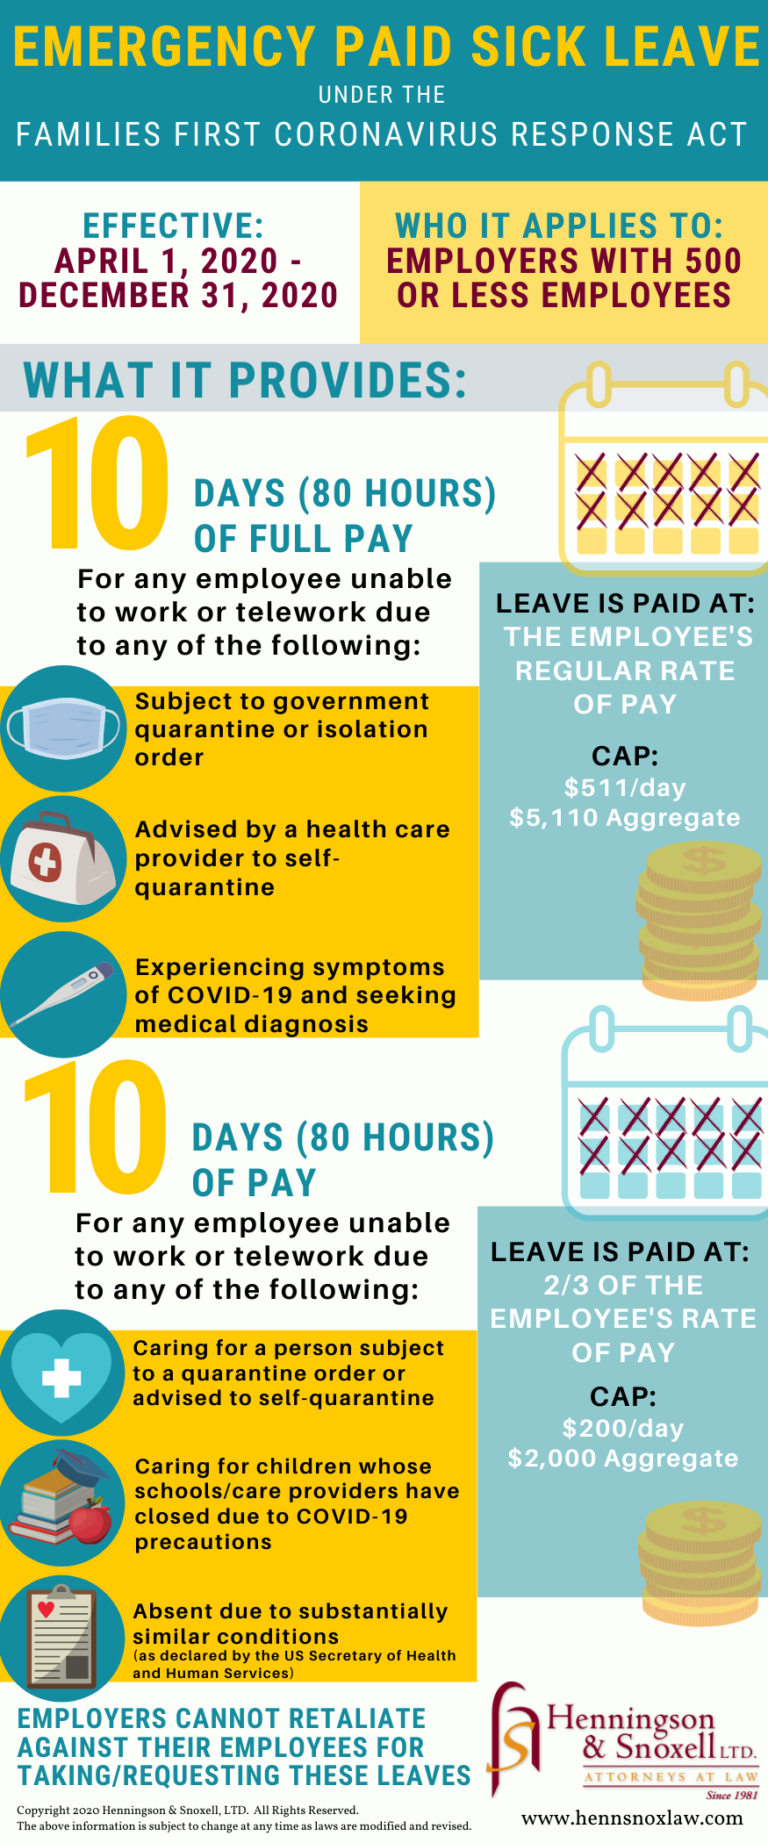 Emergency Paid Sick Leave under the new Families First Coronavirus